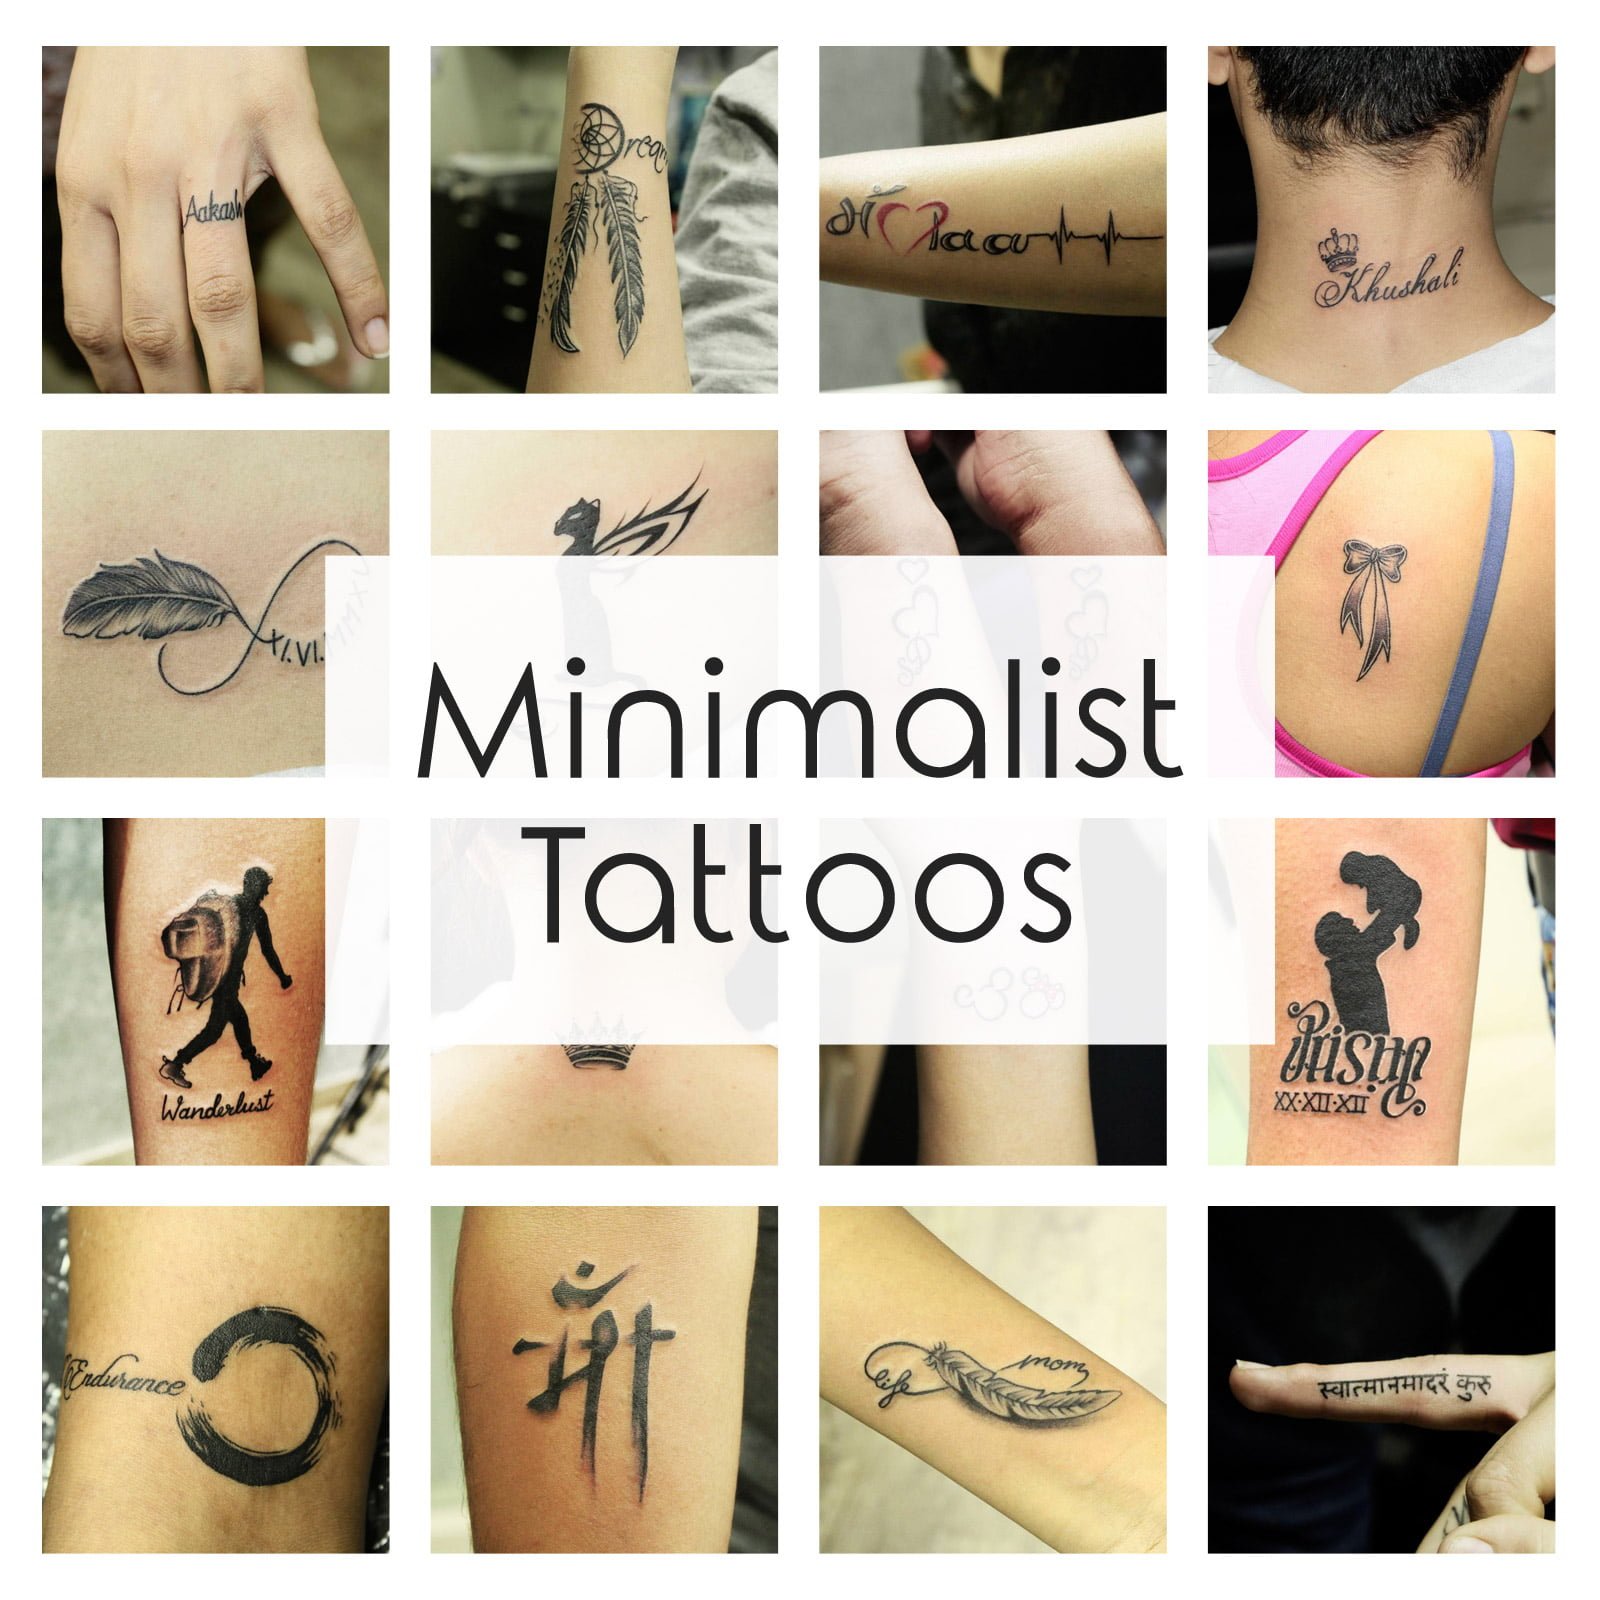 Minimalist Tattoo Ideas & Designs That Prove Subtle Things Can Be The Most Beautiful